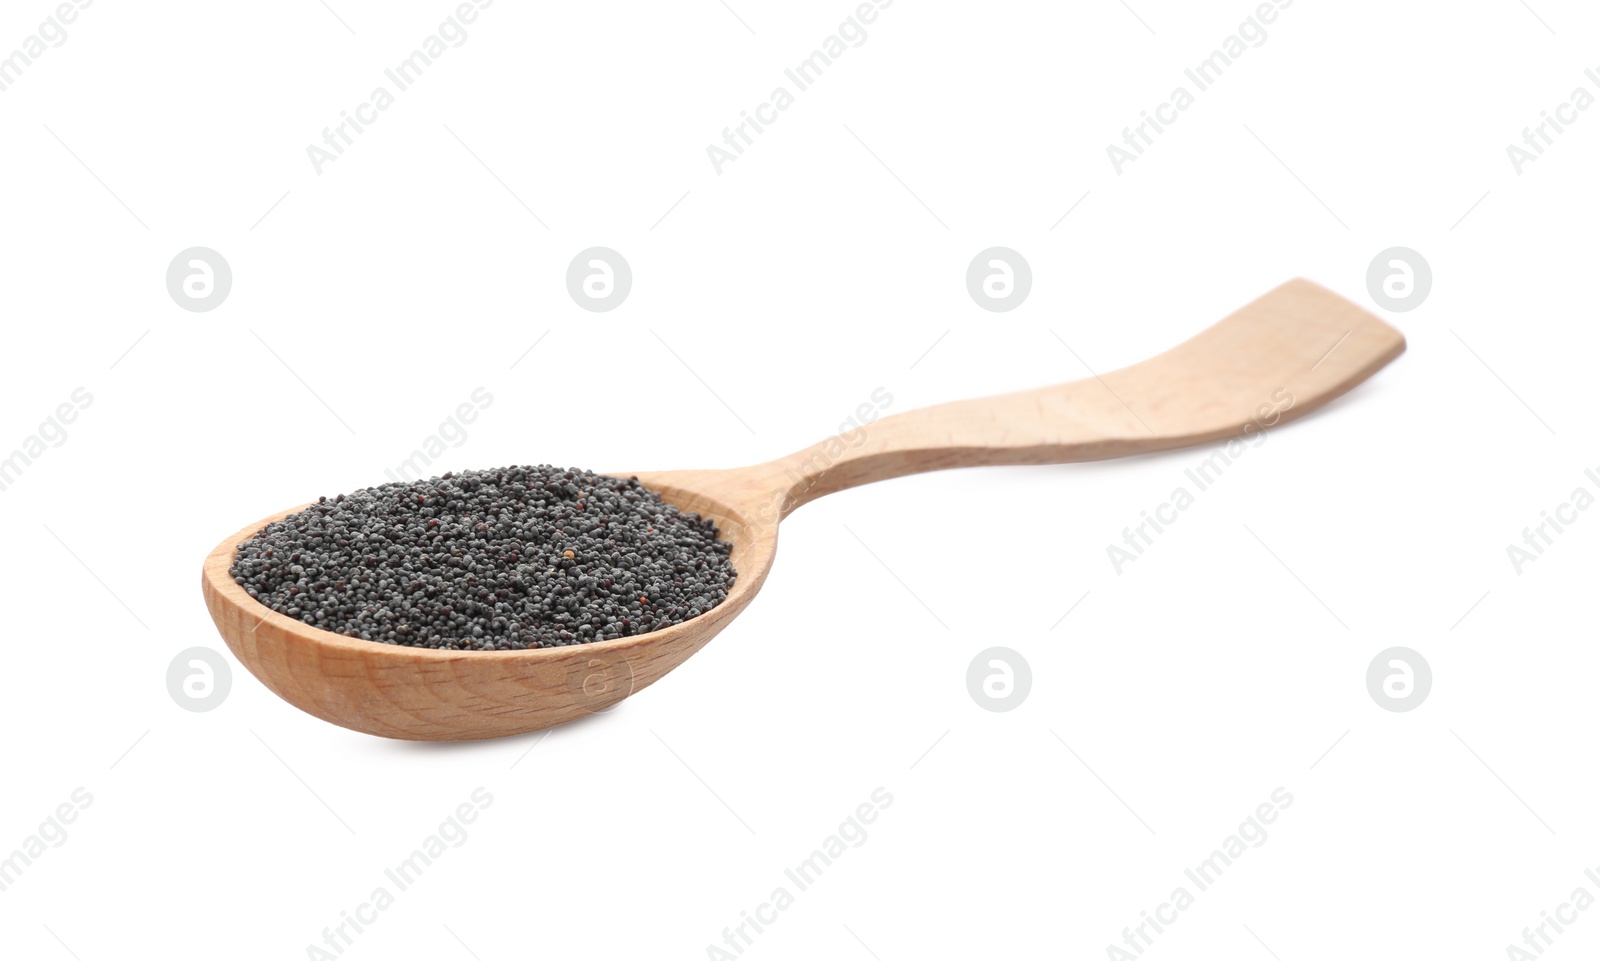 Photo of Spoon with poppy seeds isolated on white